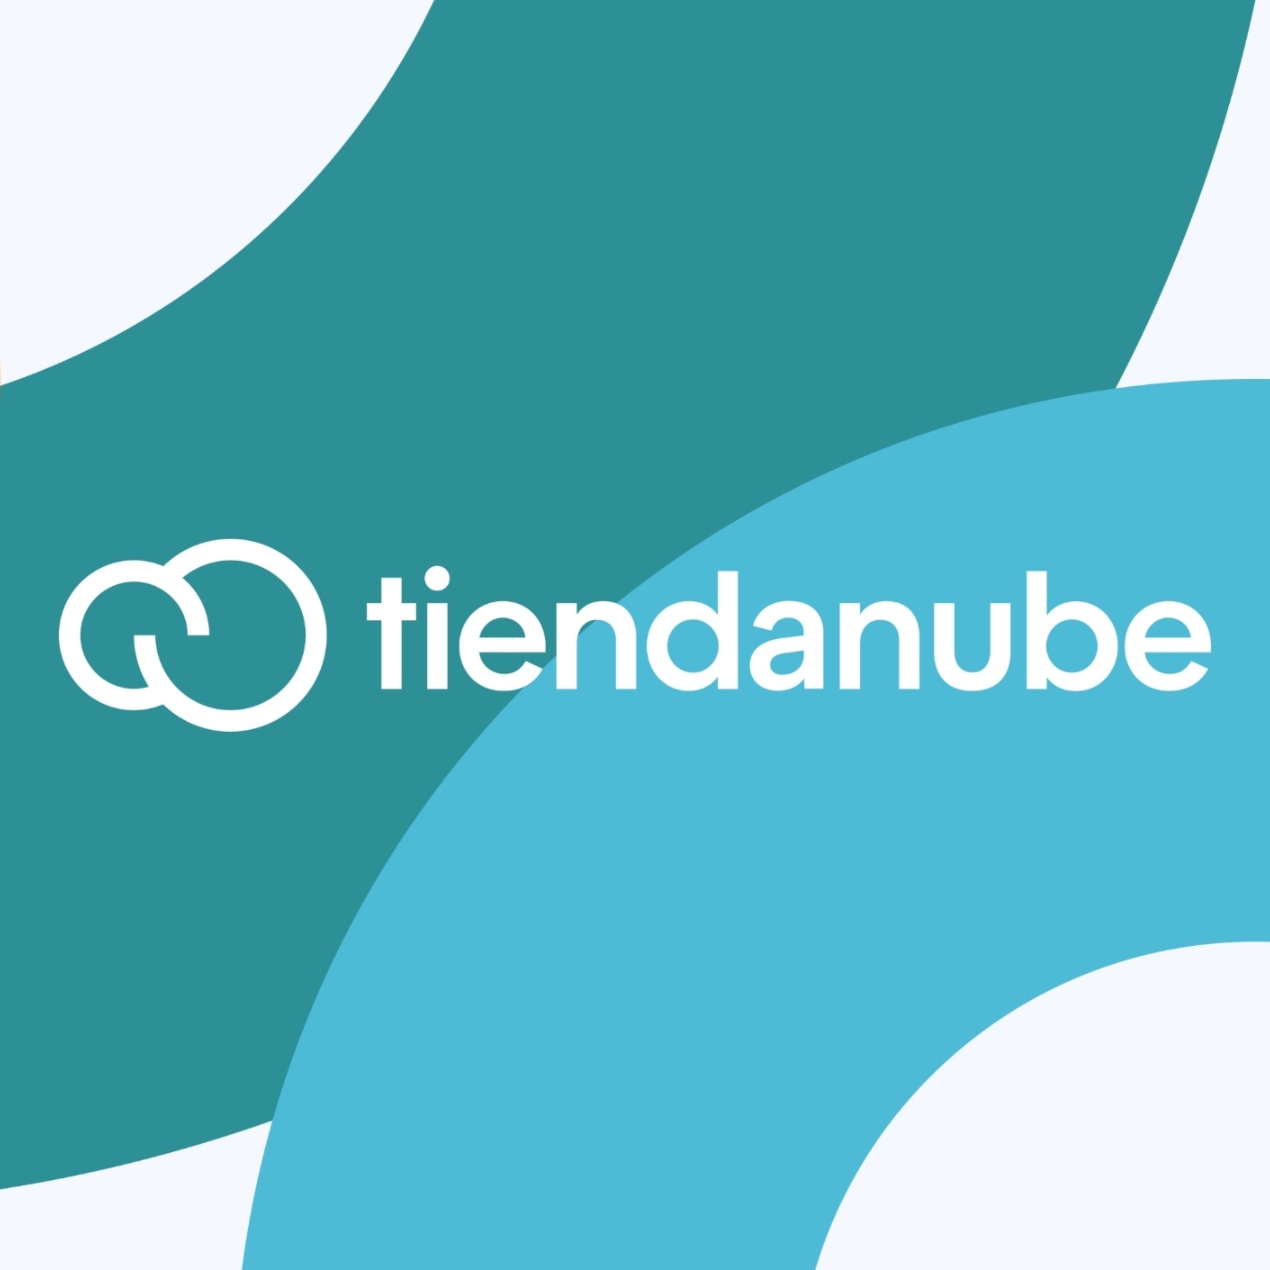 Tiendanube speeds up design iterations from weeks to days